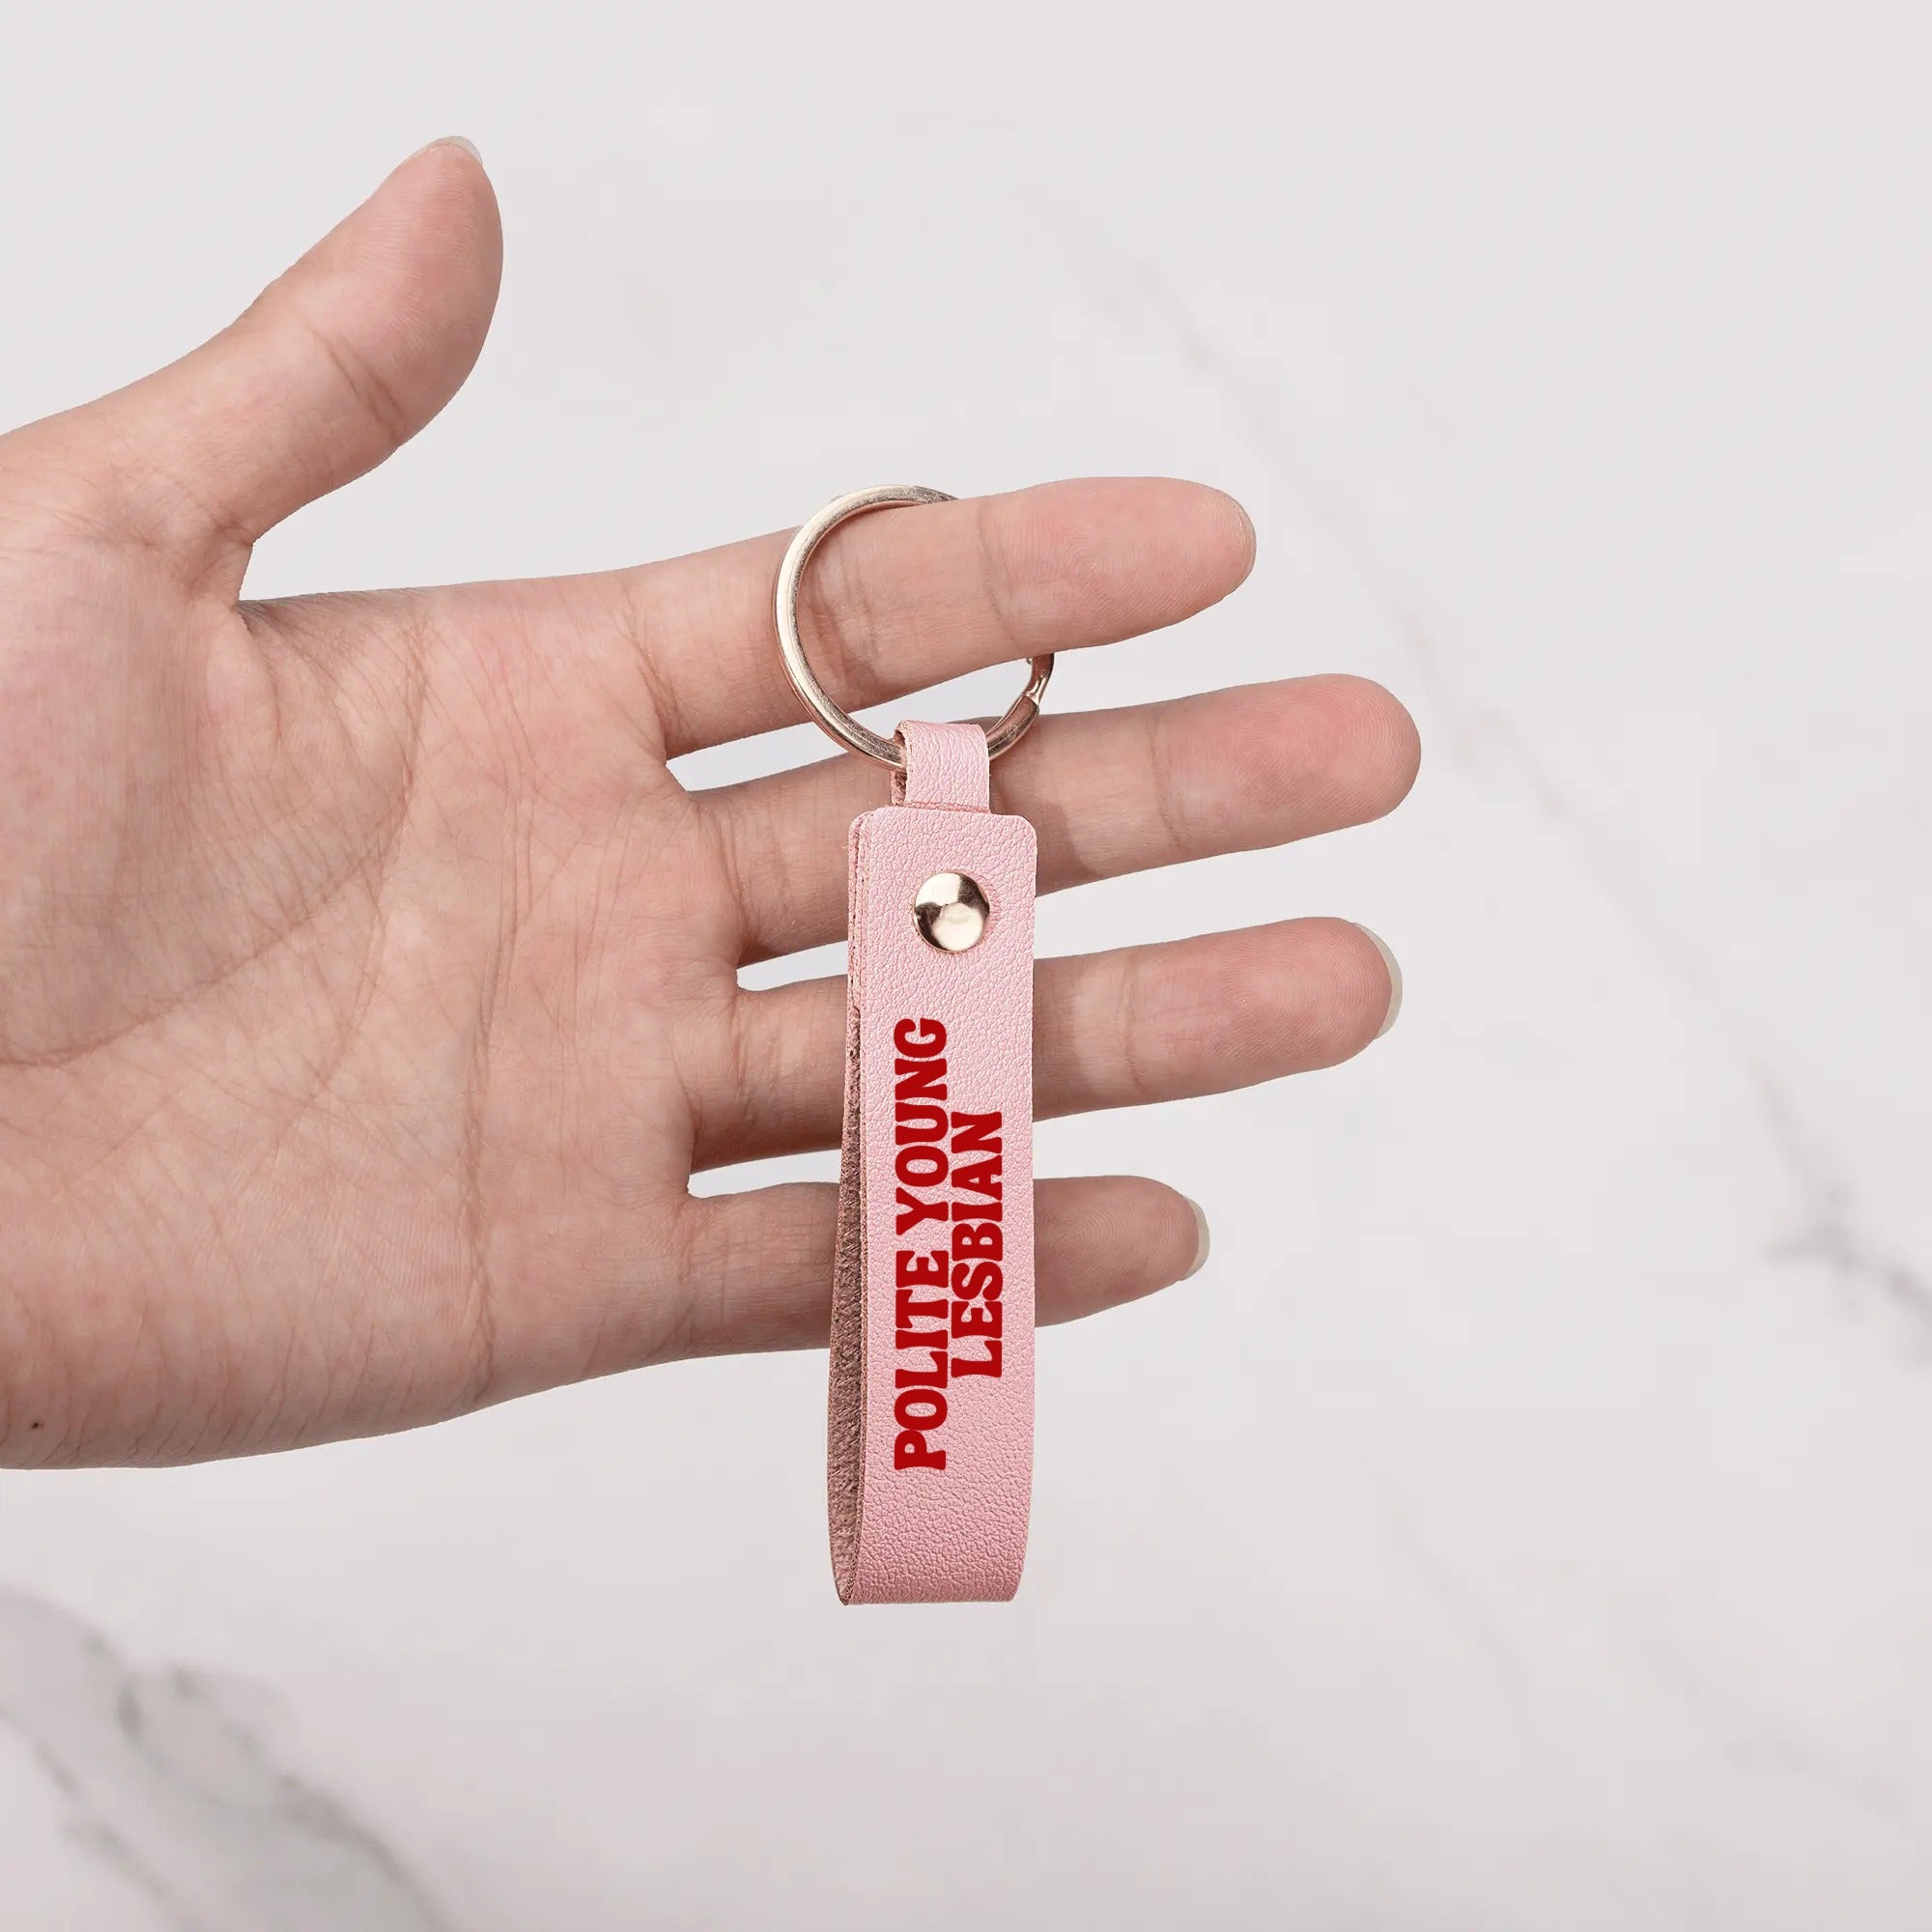 Polite Young Lesbian Keychain